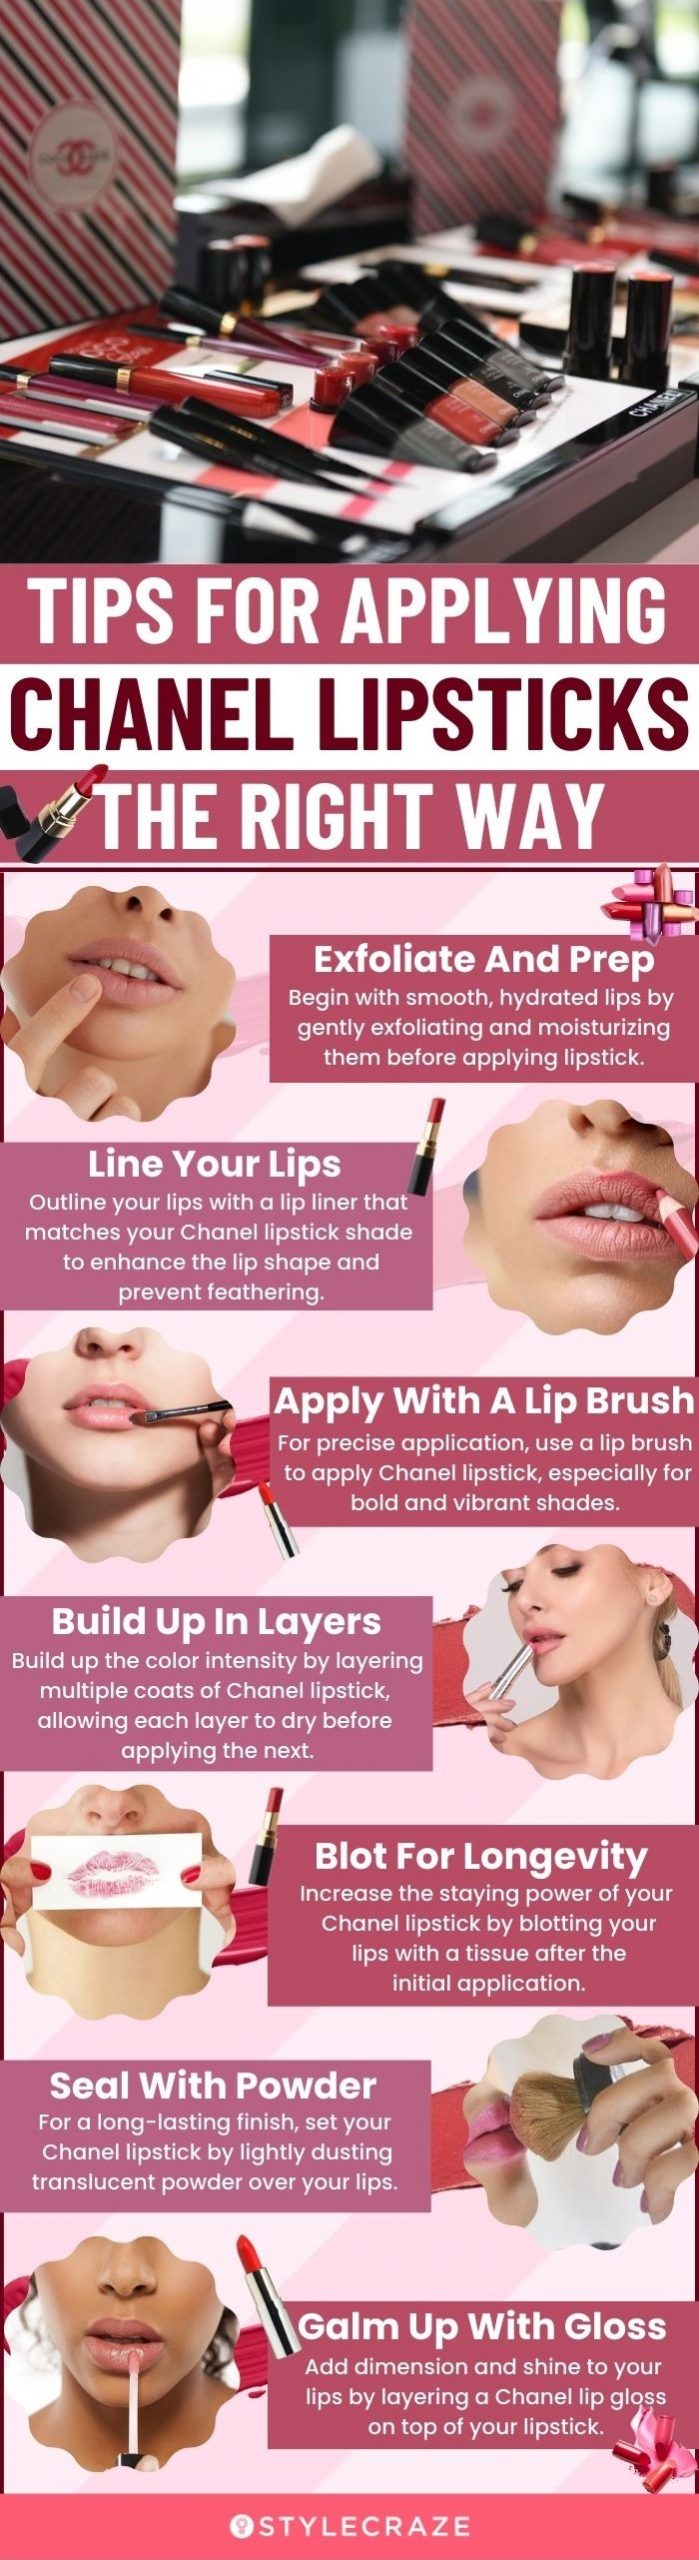 Tips and Tricks For Applying And Enhancing Chanel Lipstick (infographic)